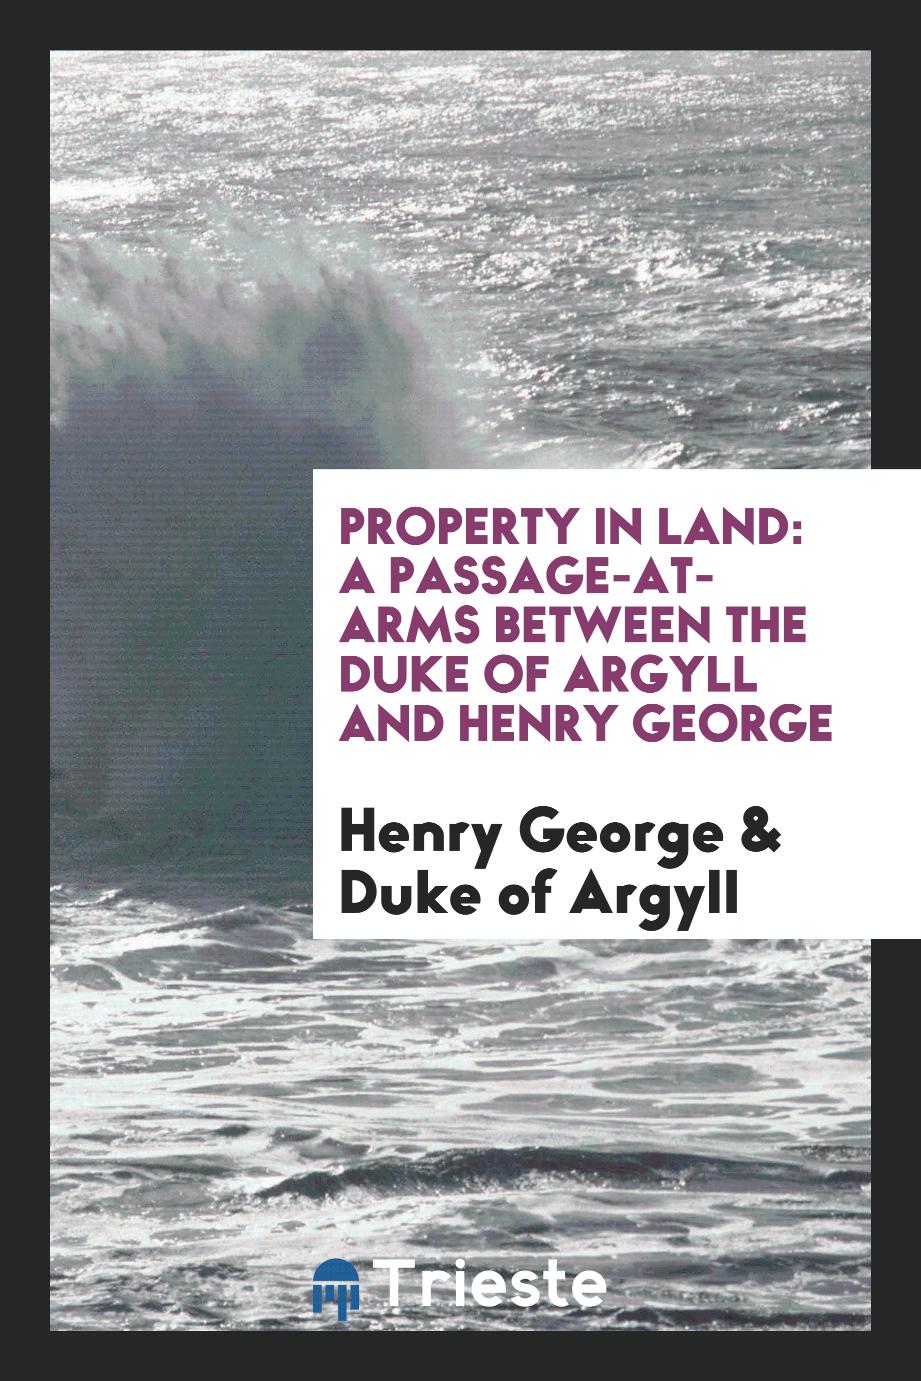 Property in Land: A Passage-at-arms Between the Duke of Argyll and Henry George